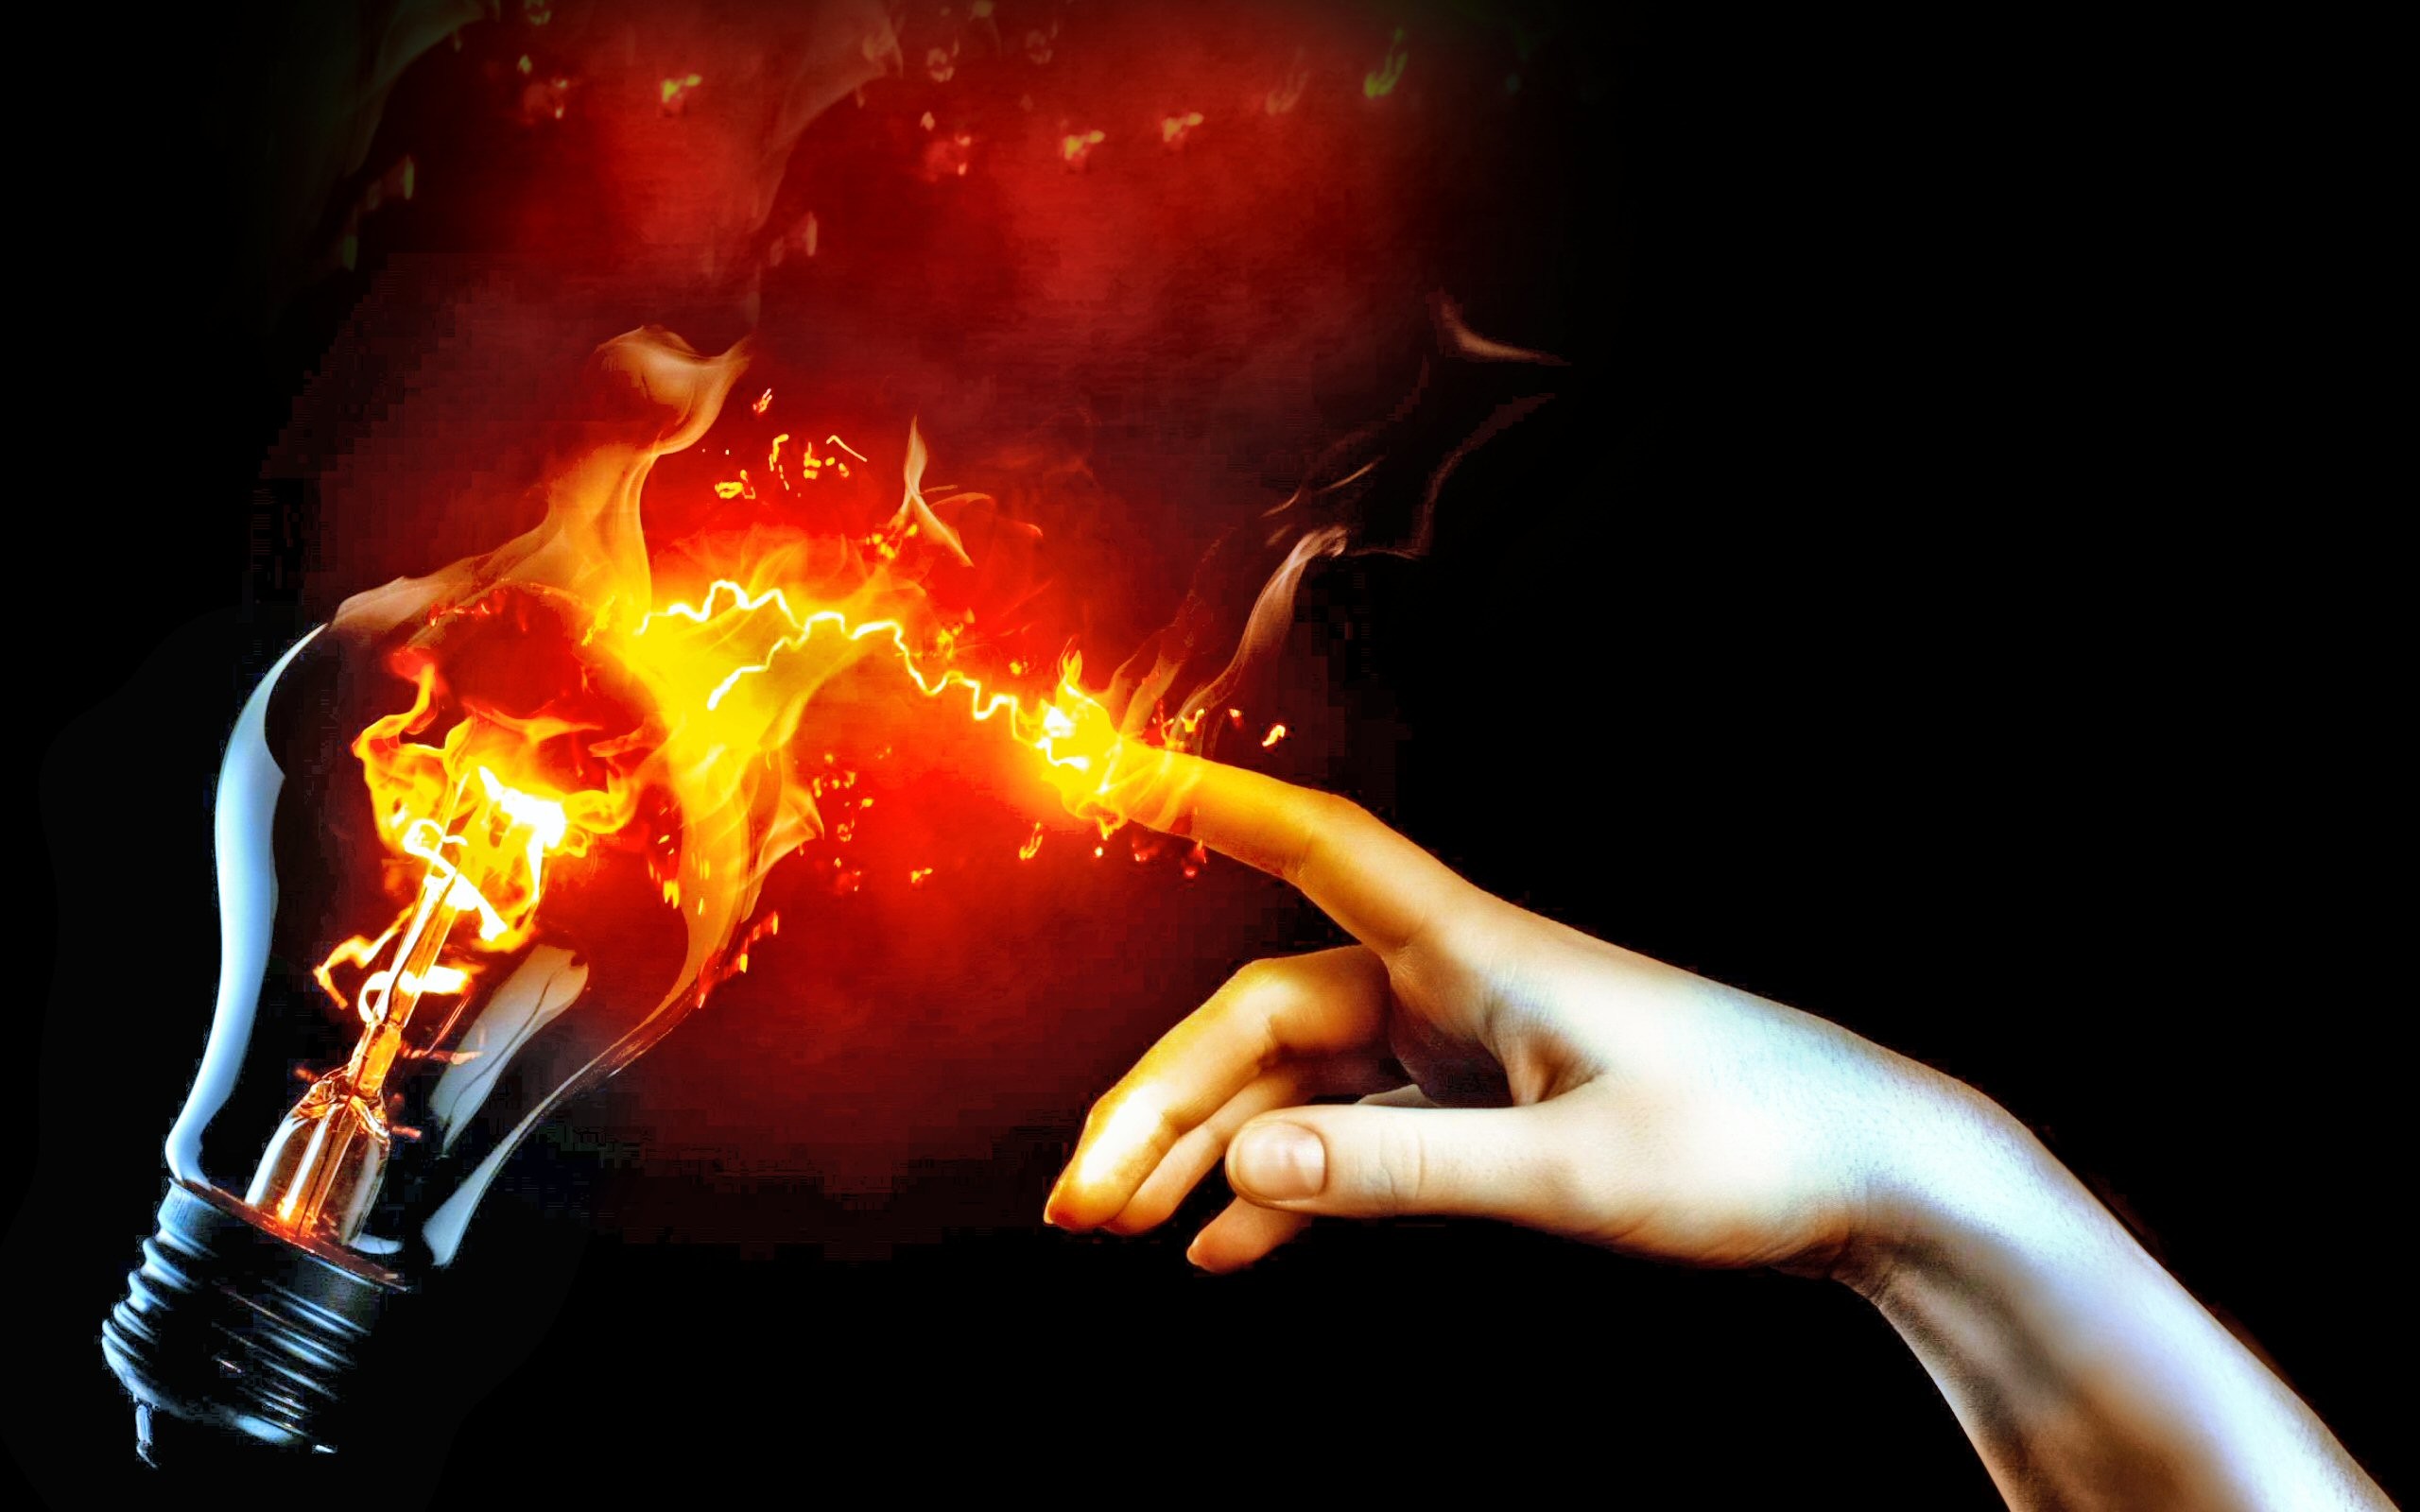 General 2560x1600 abstract fire light bulb red hands fingers technology simple background burning